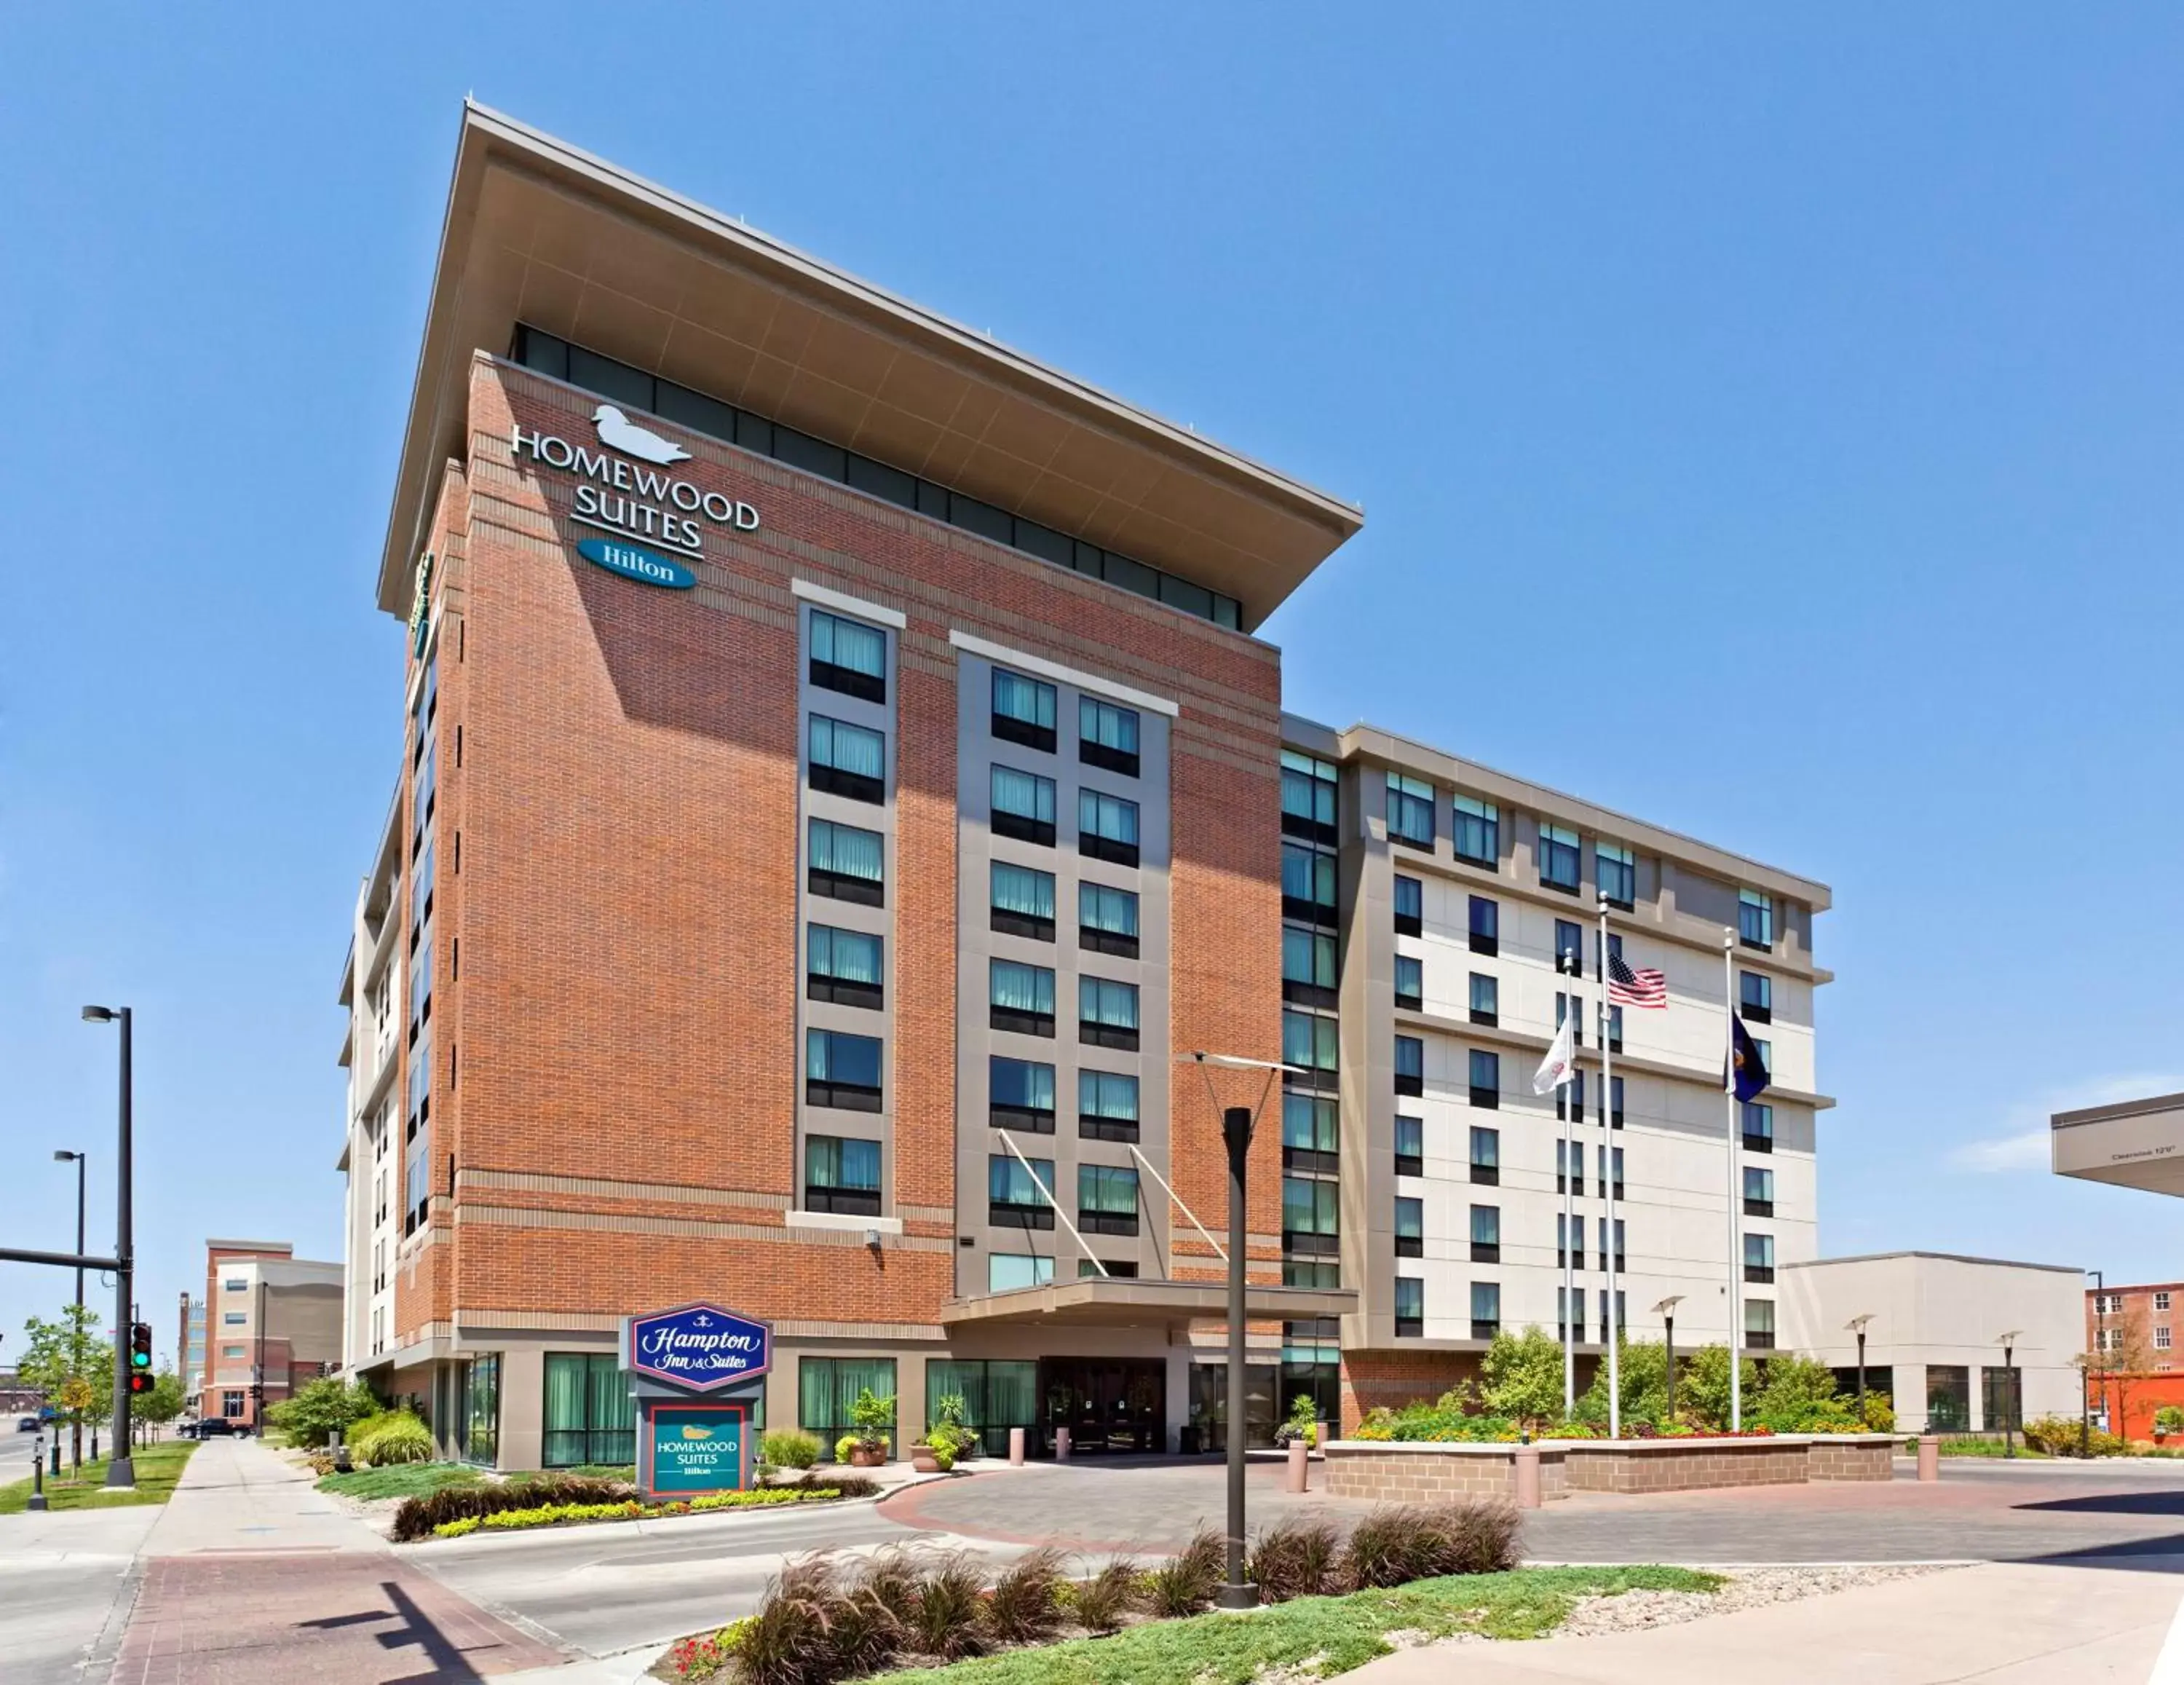 Property Building in Homewood Suites by Hilton Omaha - Downtown